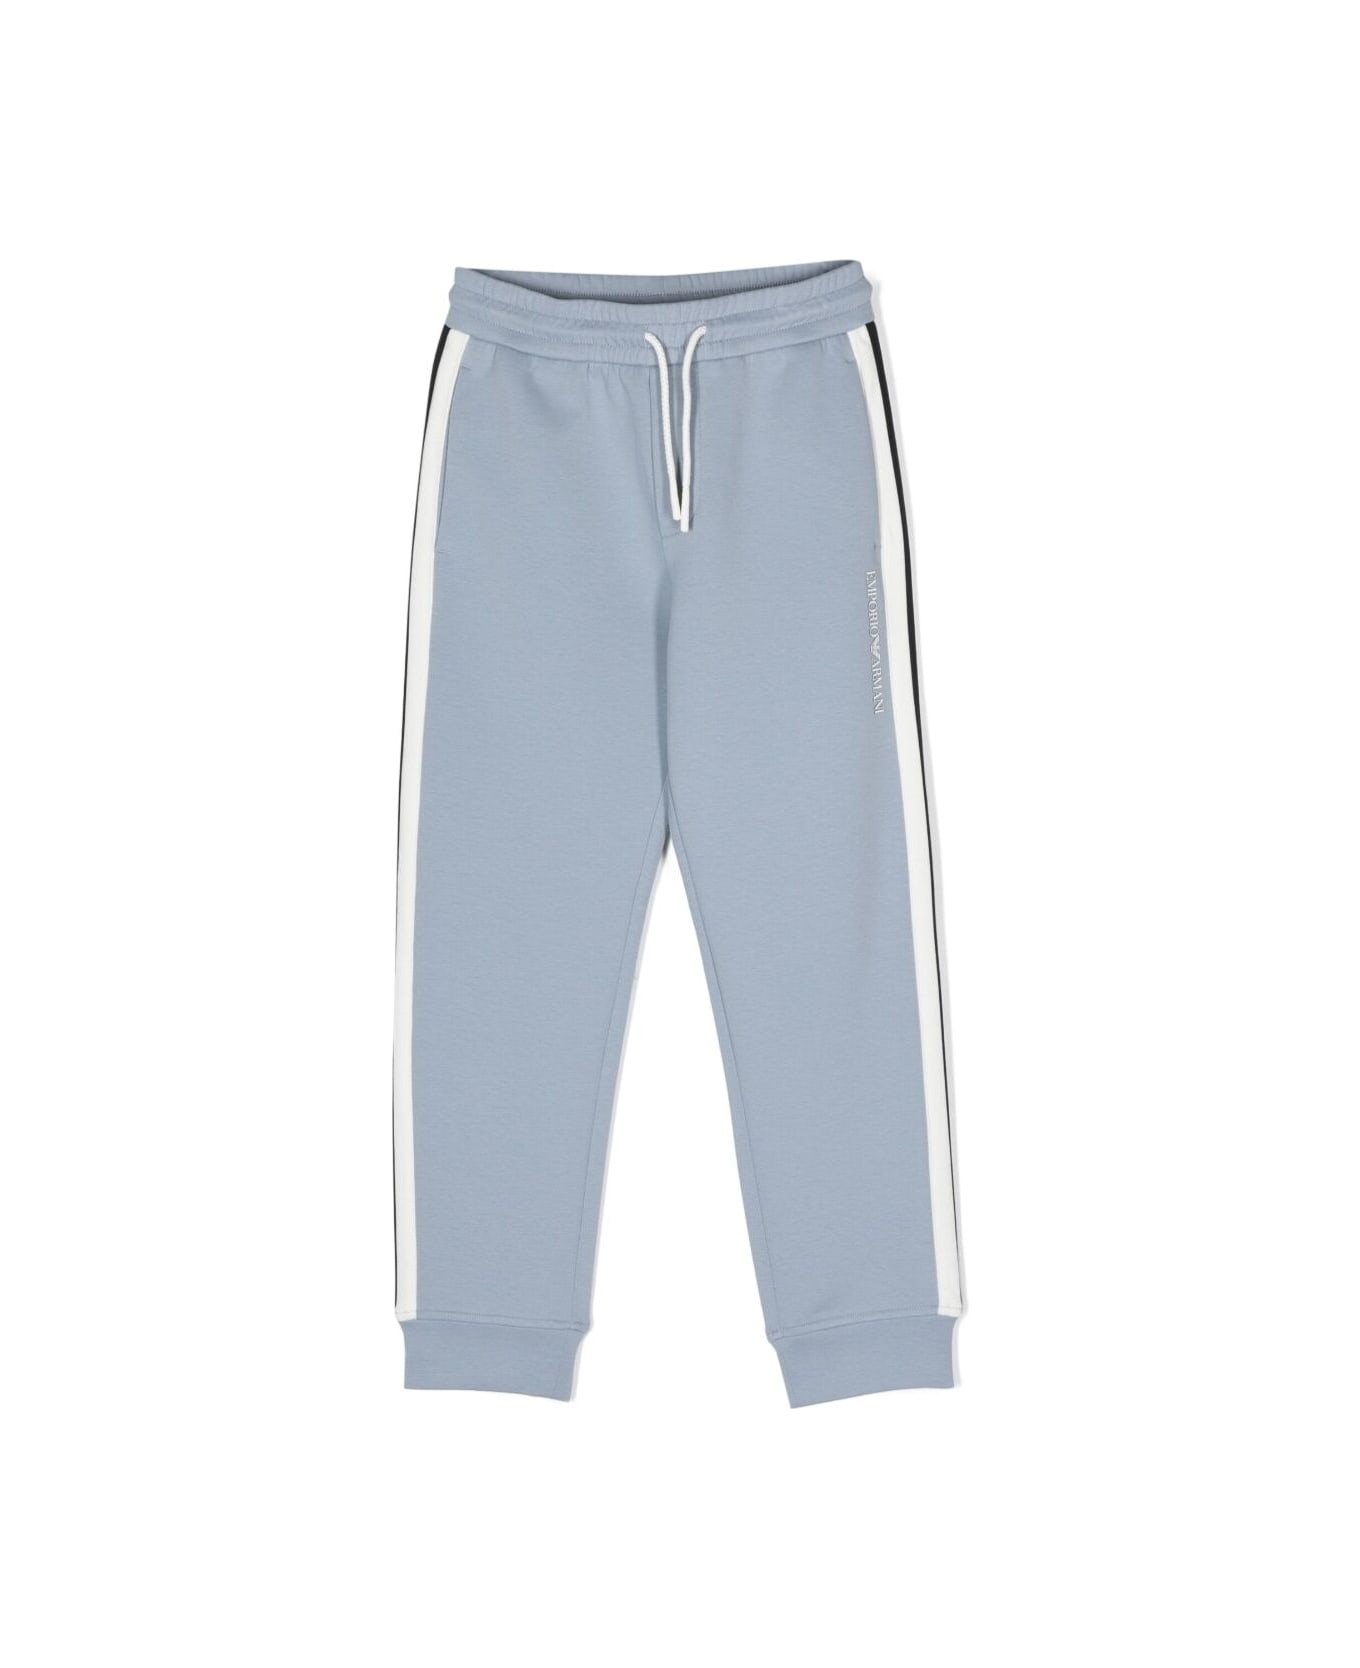 Emporio Armani Light Blue Joggings Pants With Drawstring And Contrasting Band In Cotton Blend Boy - Blu